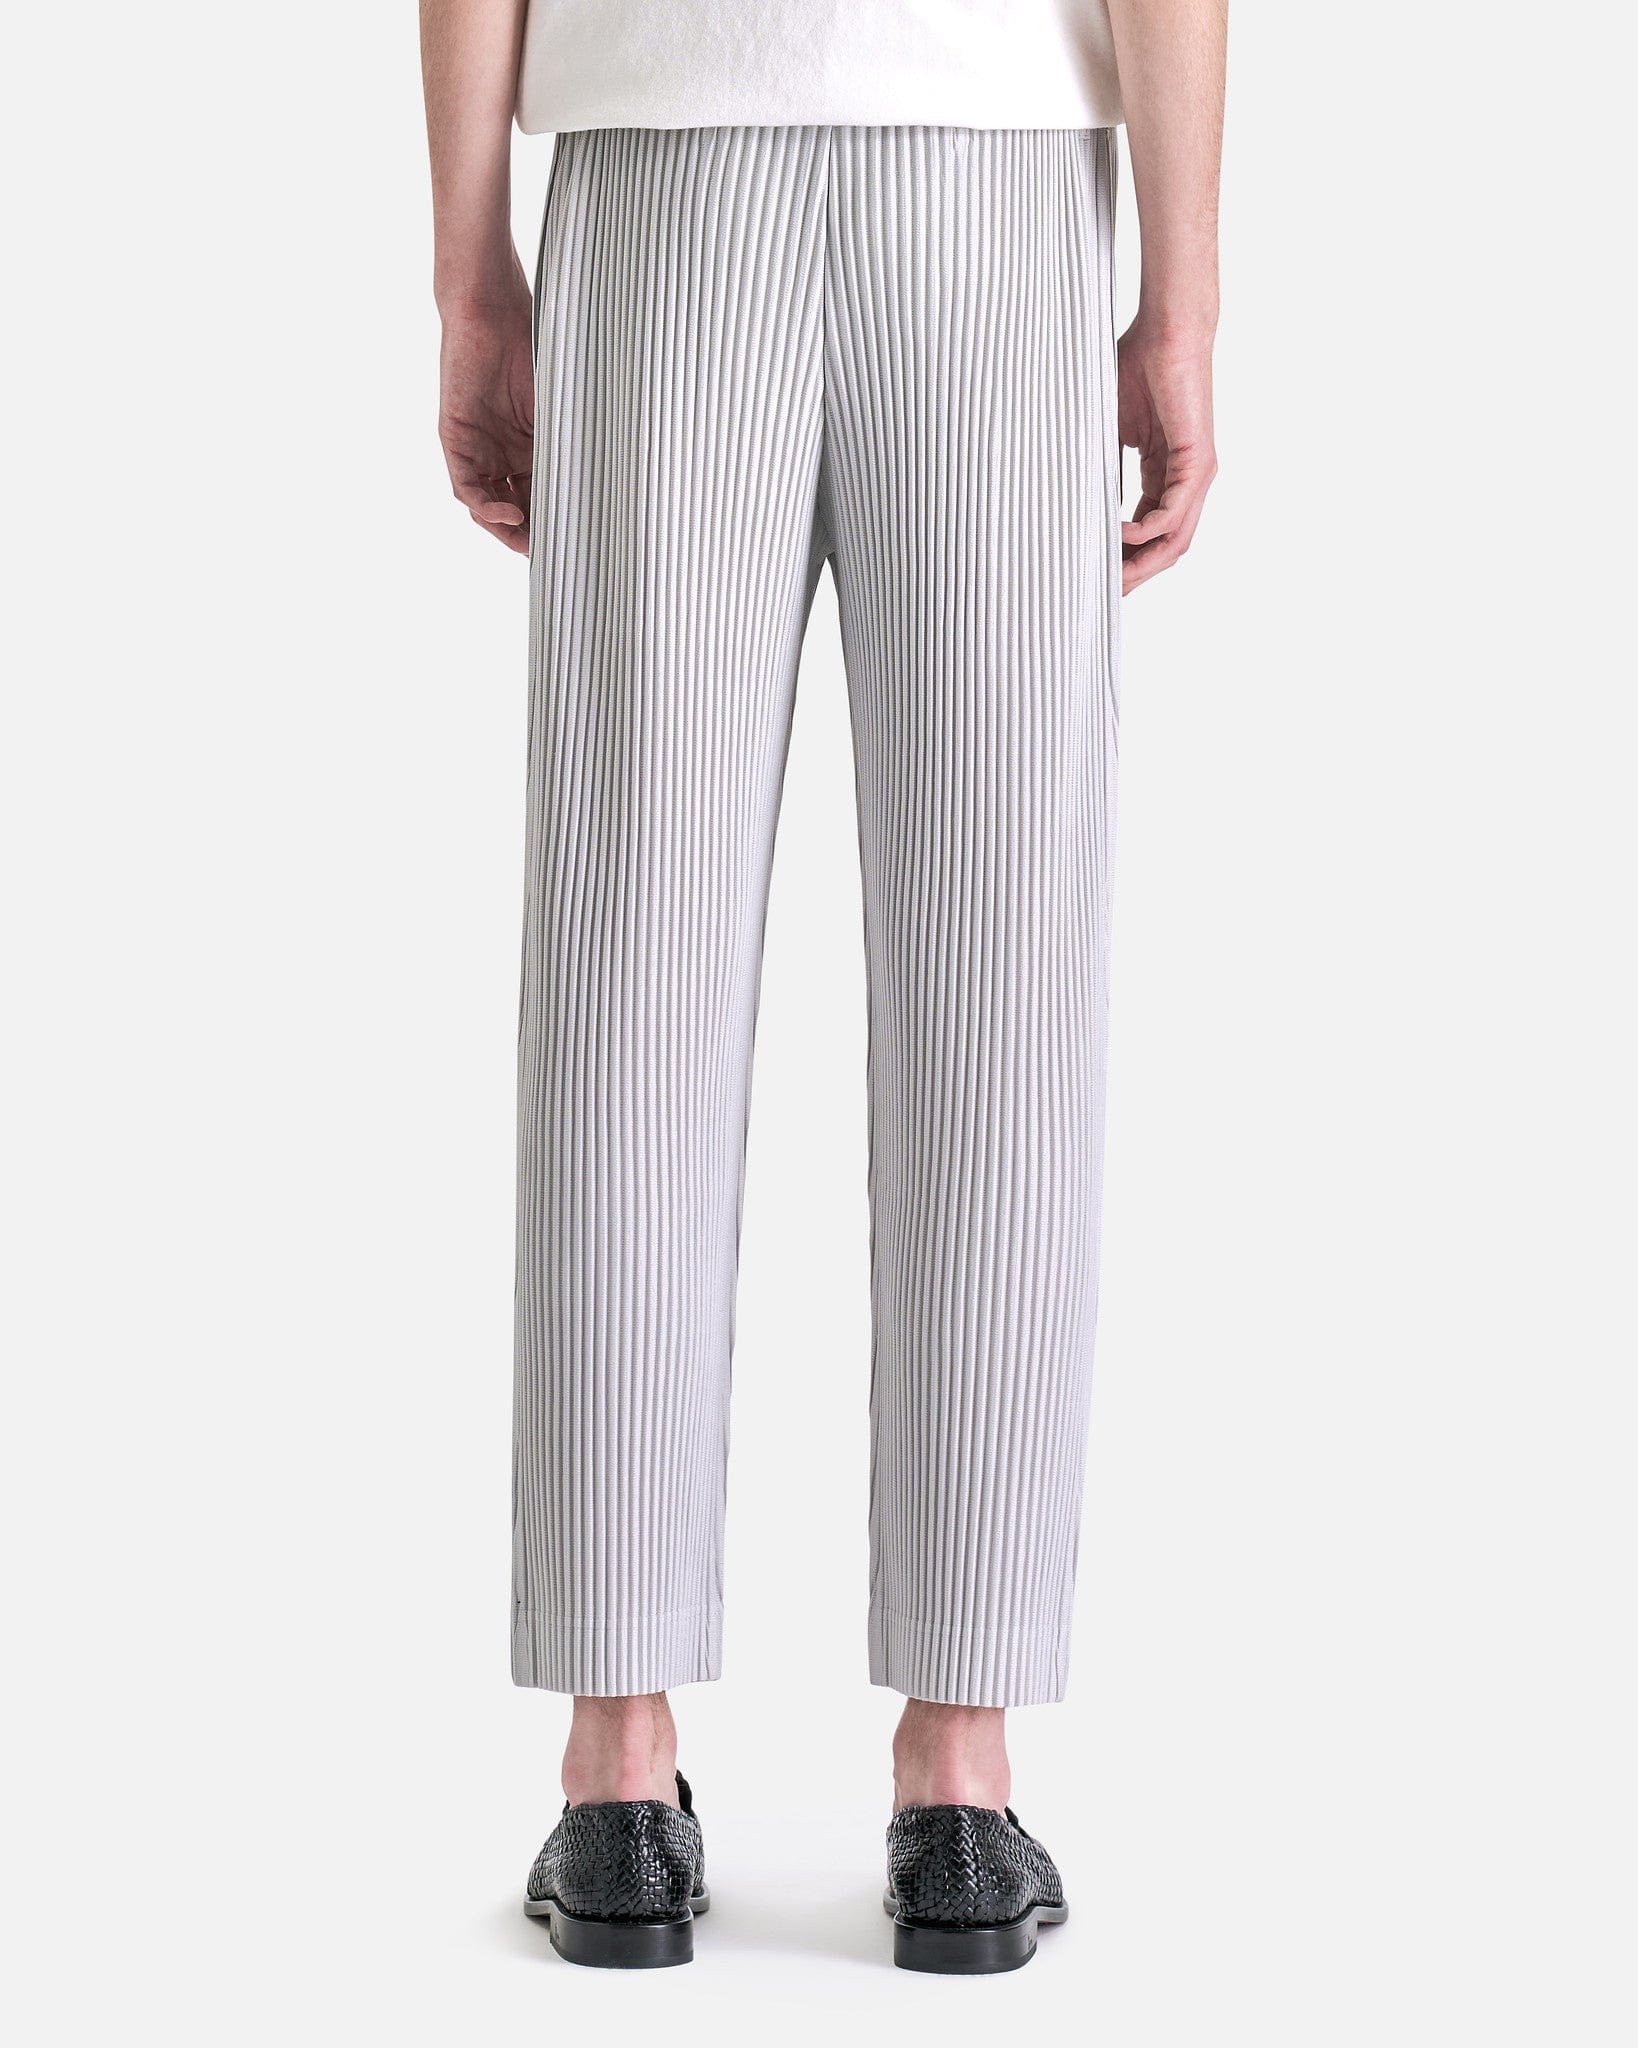 Basics Pleated Trousers in Light Gray